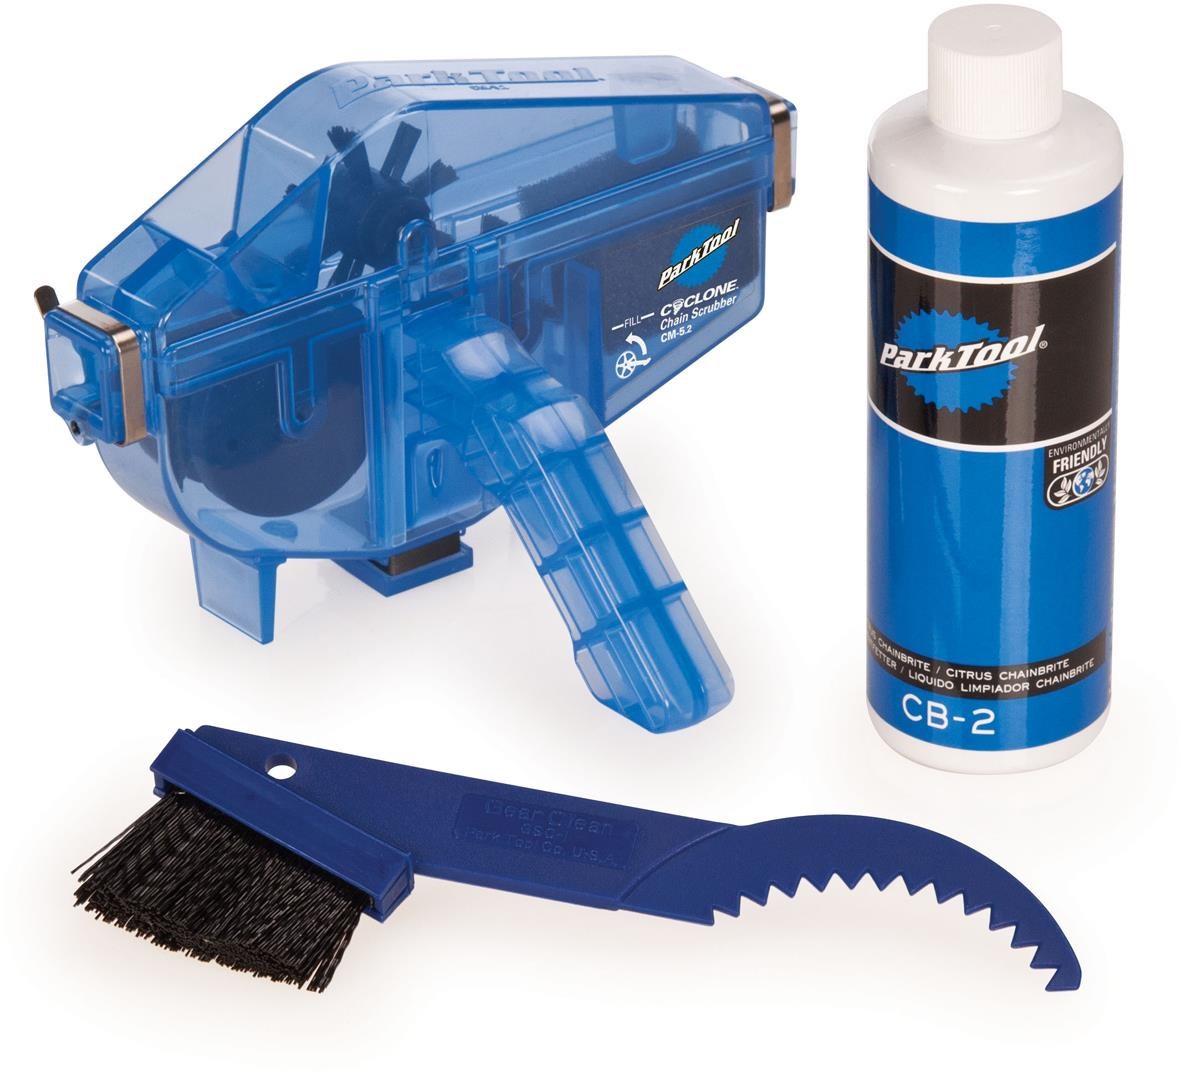 Park Tool CG2.3 ChainGang Cleaning System product image